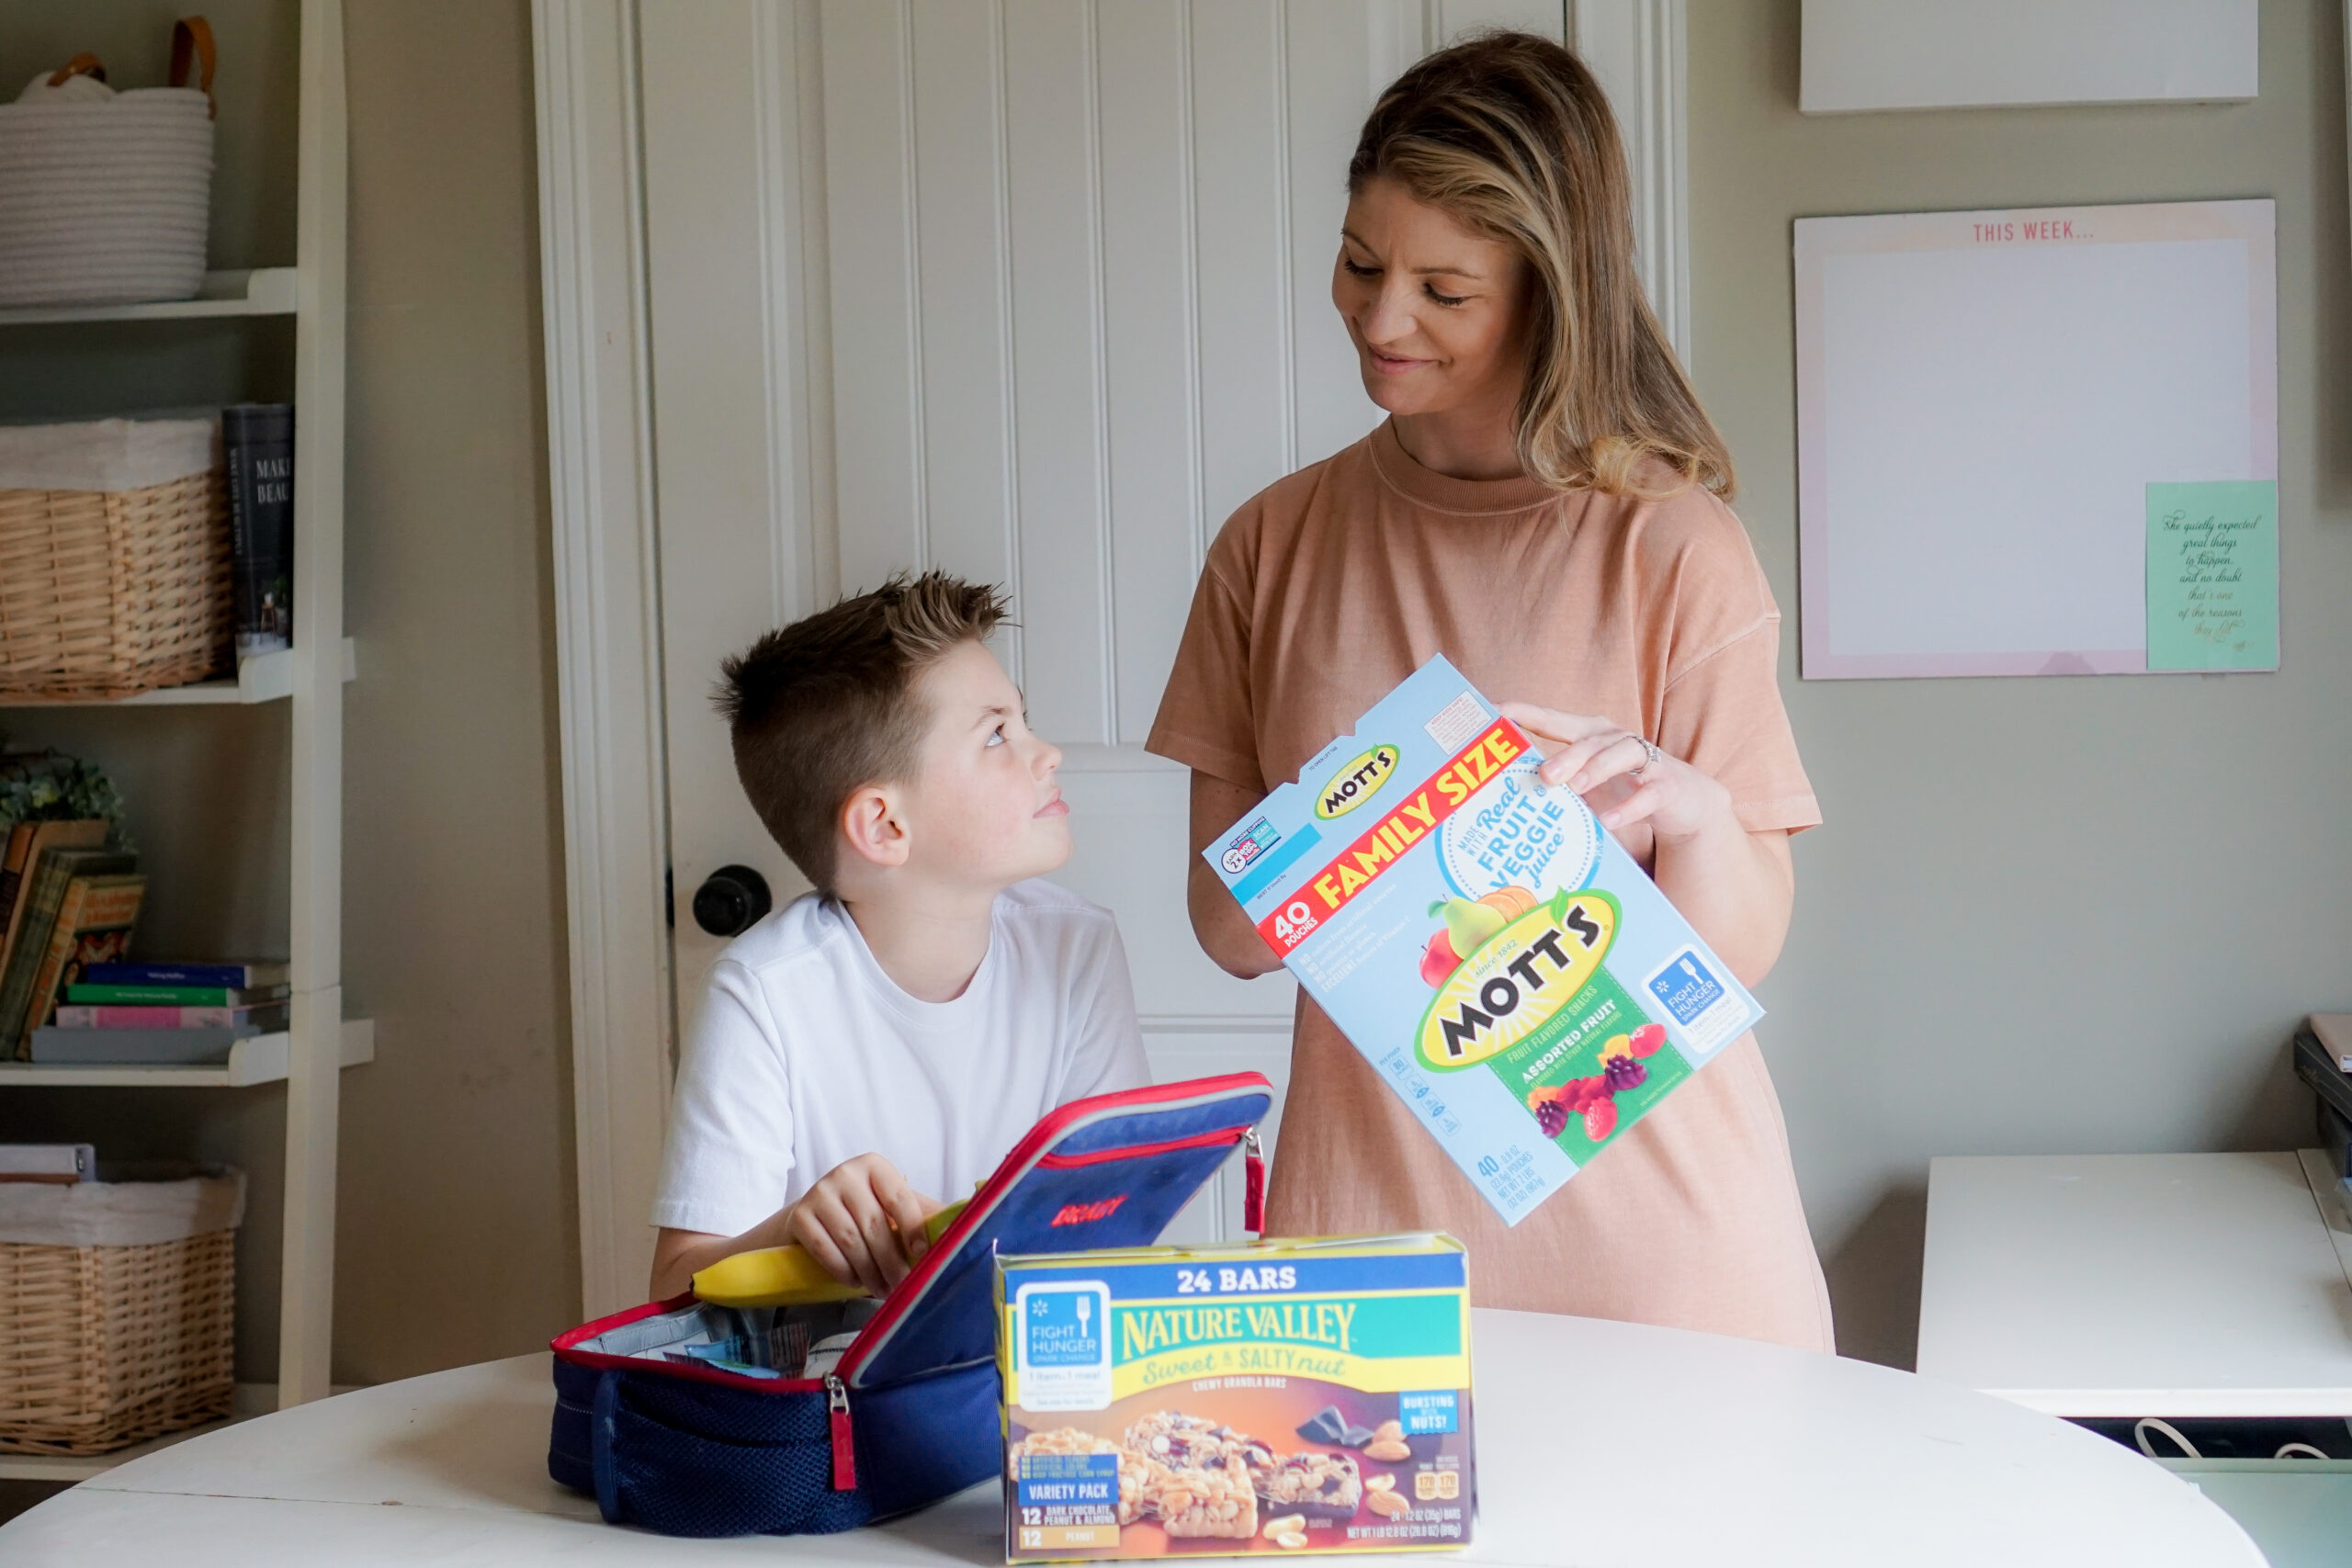 Kids lunch ideas with Misty Nelson, mom blogger and Instagram influencera